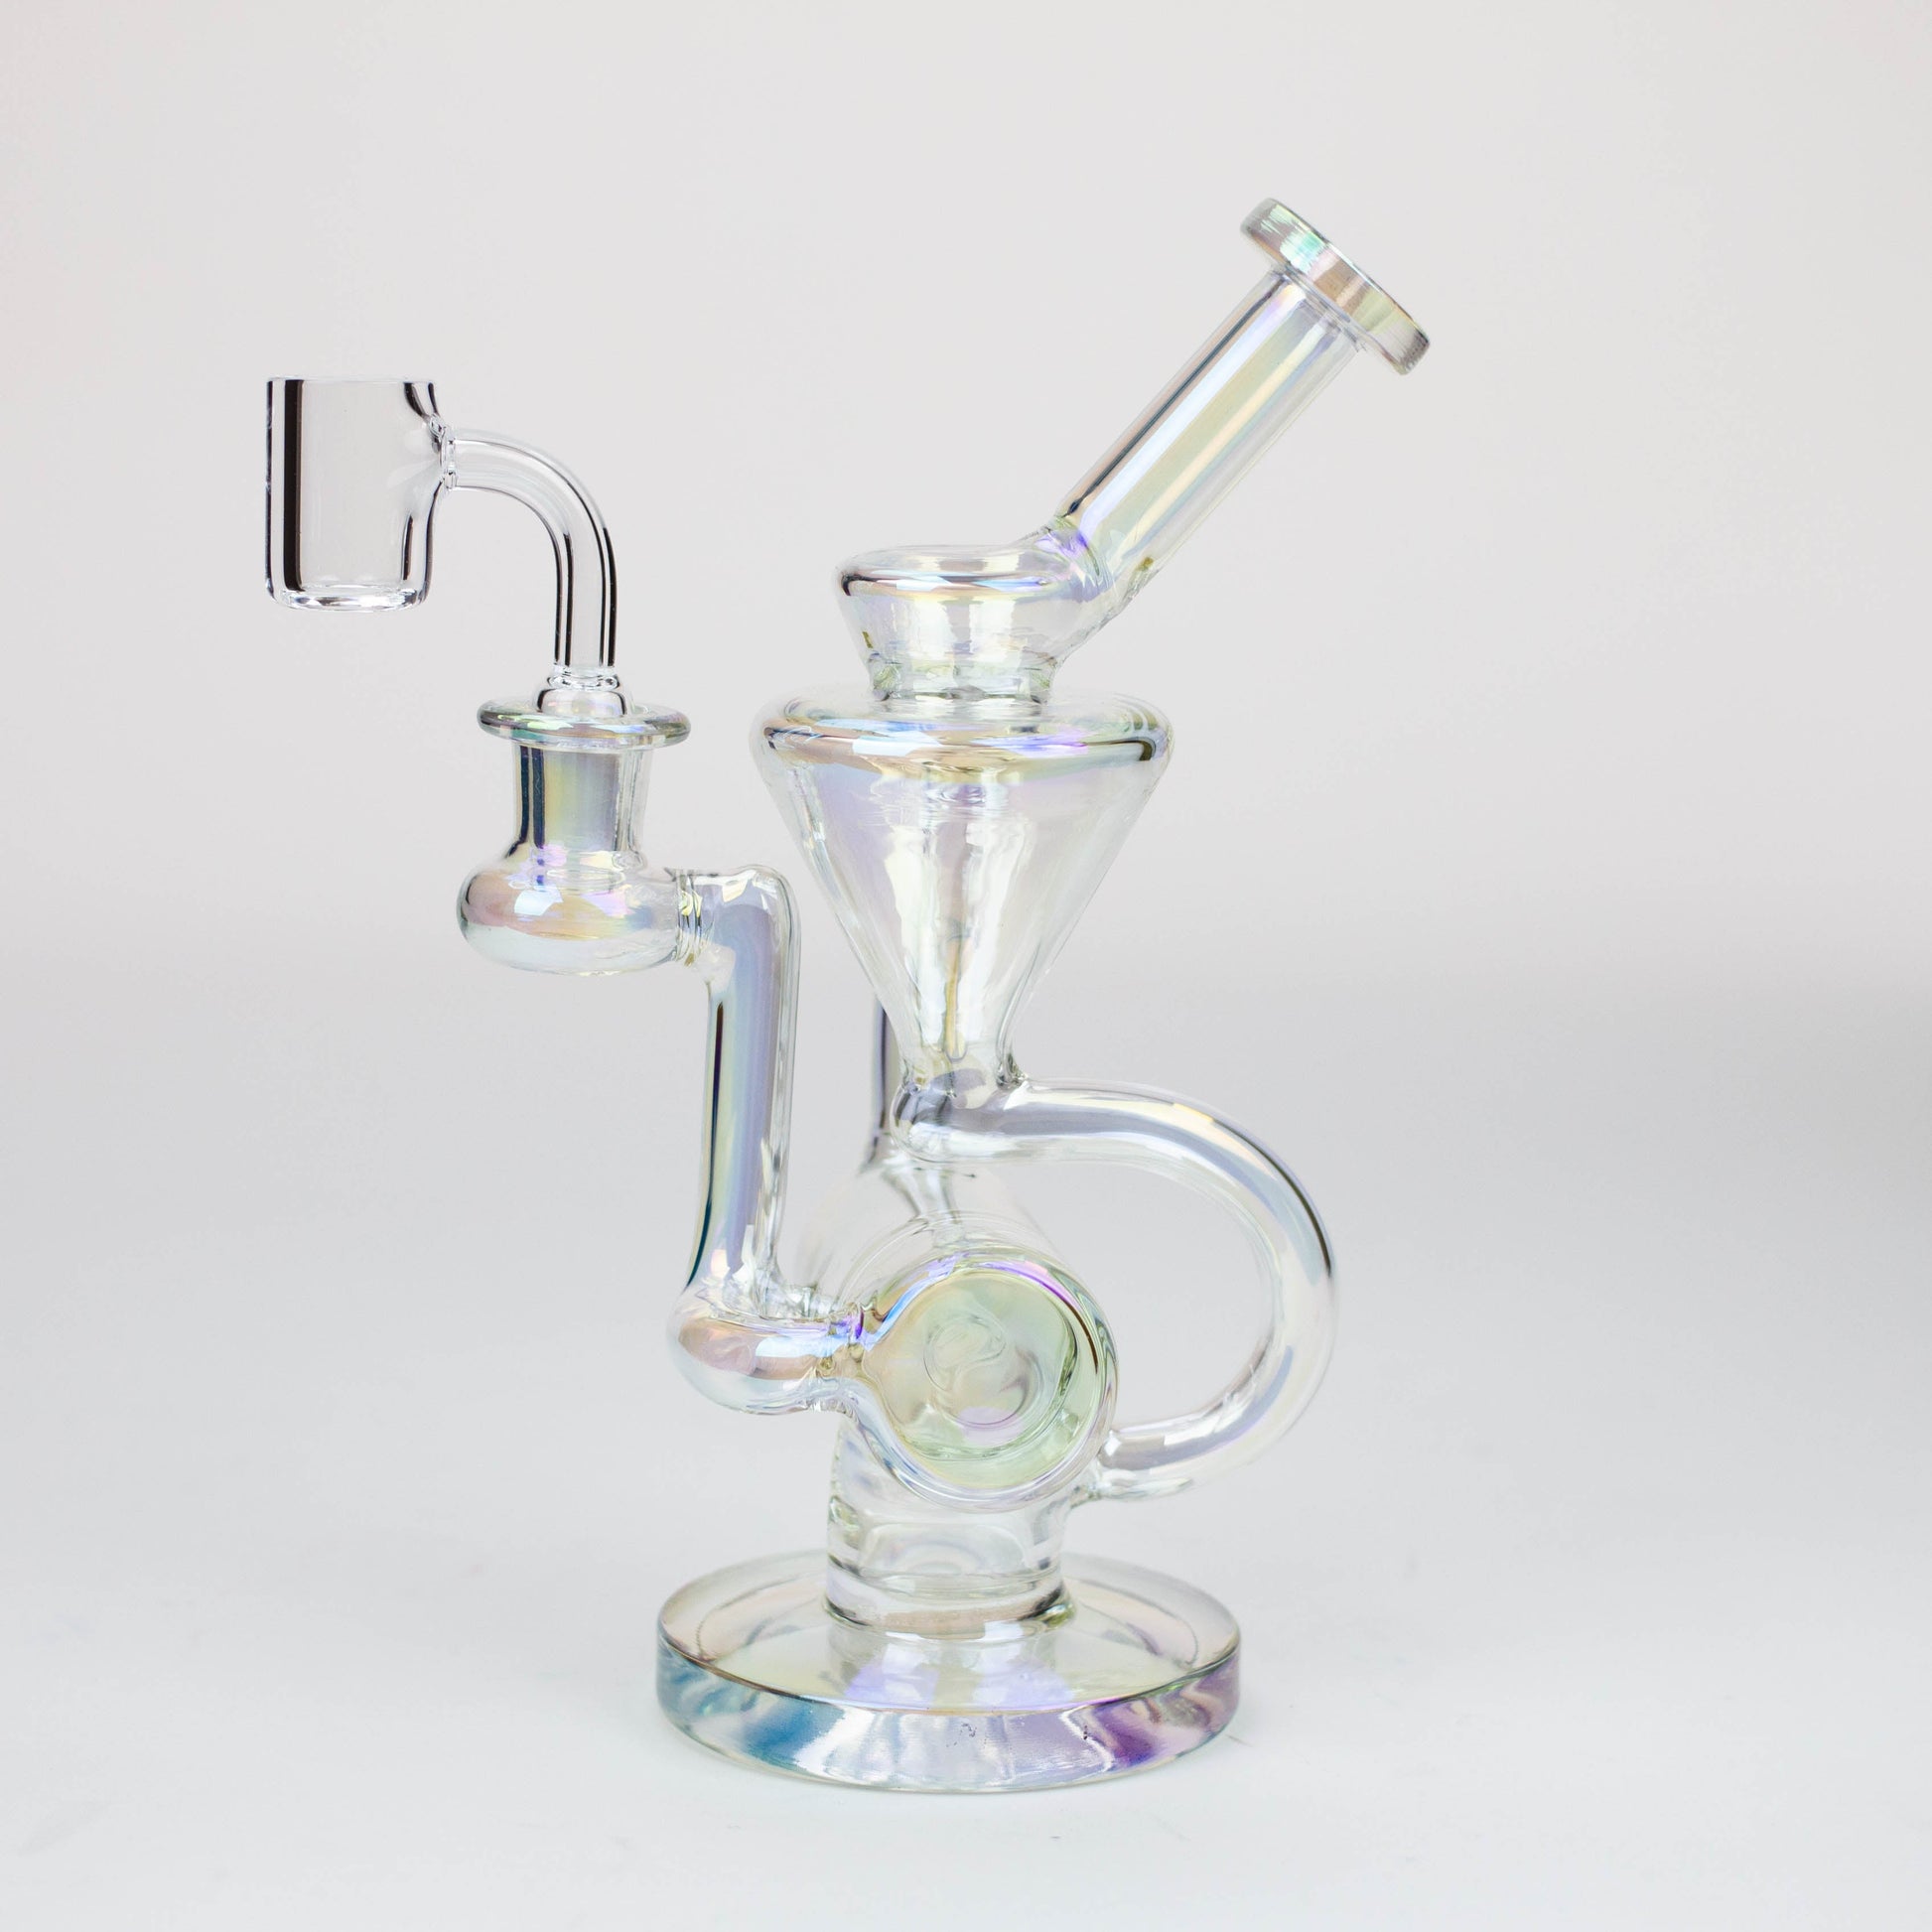 8" 2-in-1 electroplated glass recycler rig_1